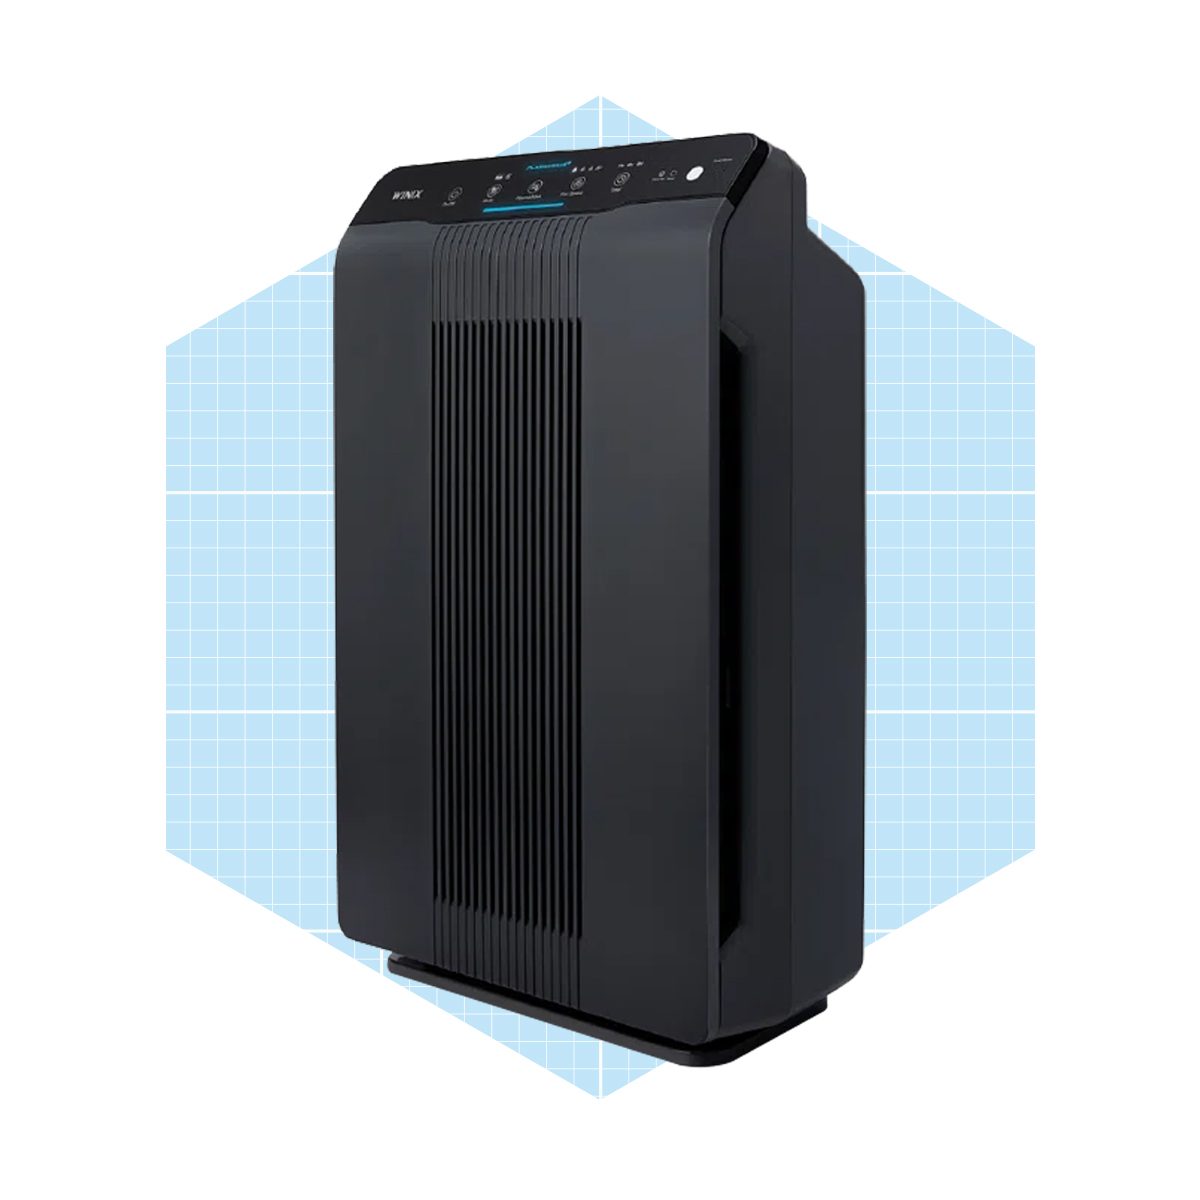 Winix Stage True Hepa Air Purifier With Washable Aoc Carbon Filter & Plasmawave Technology Ecomm Wayfair.com